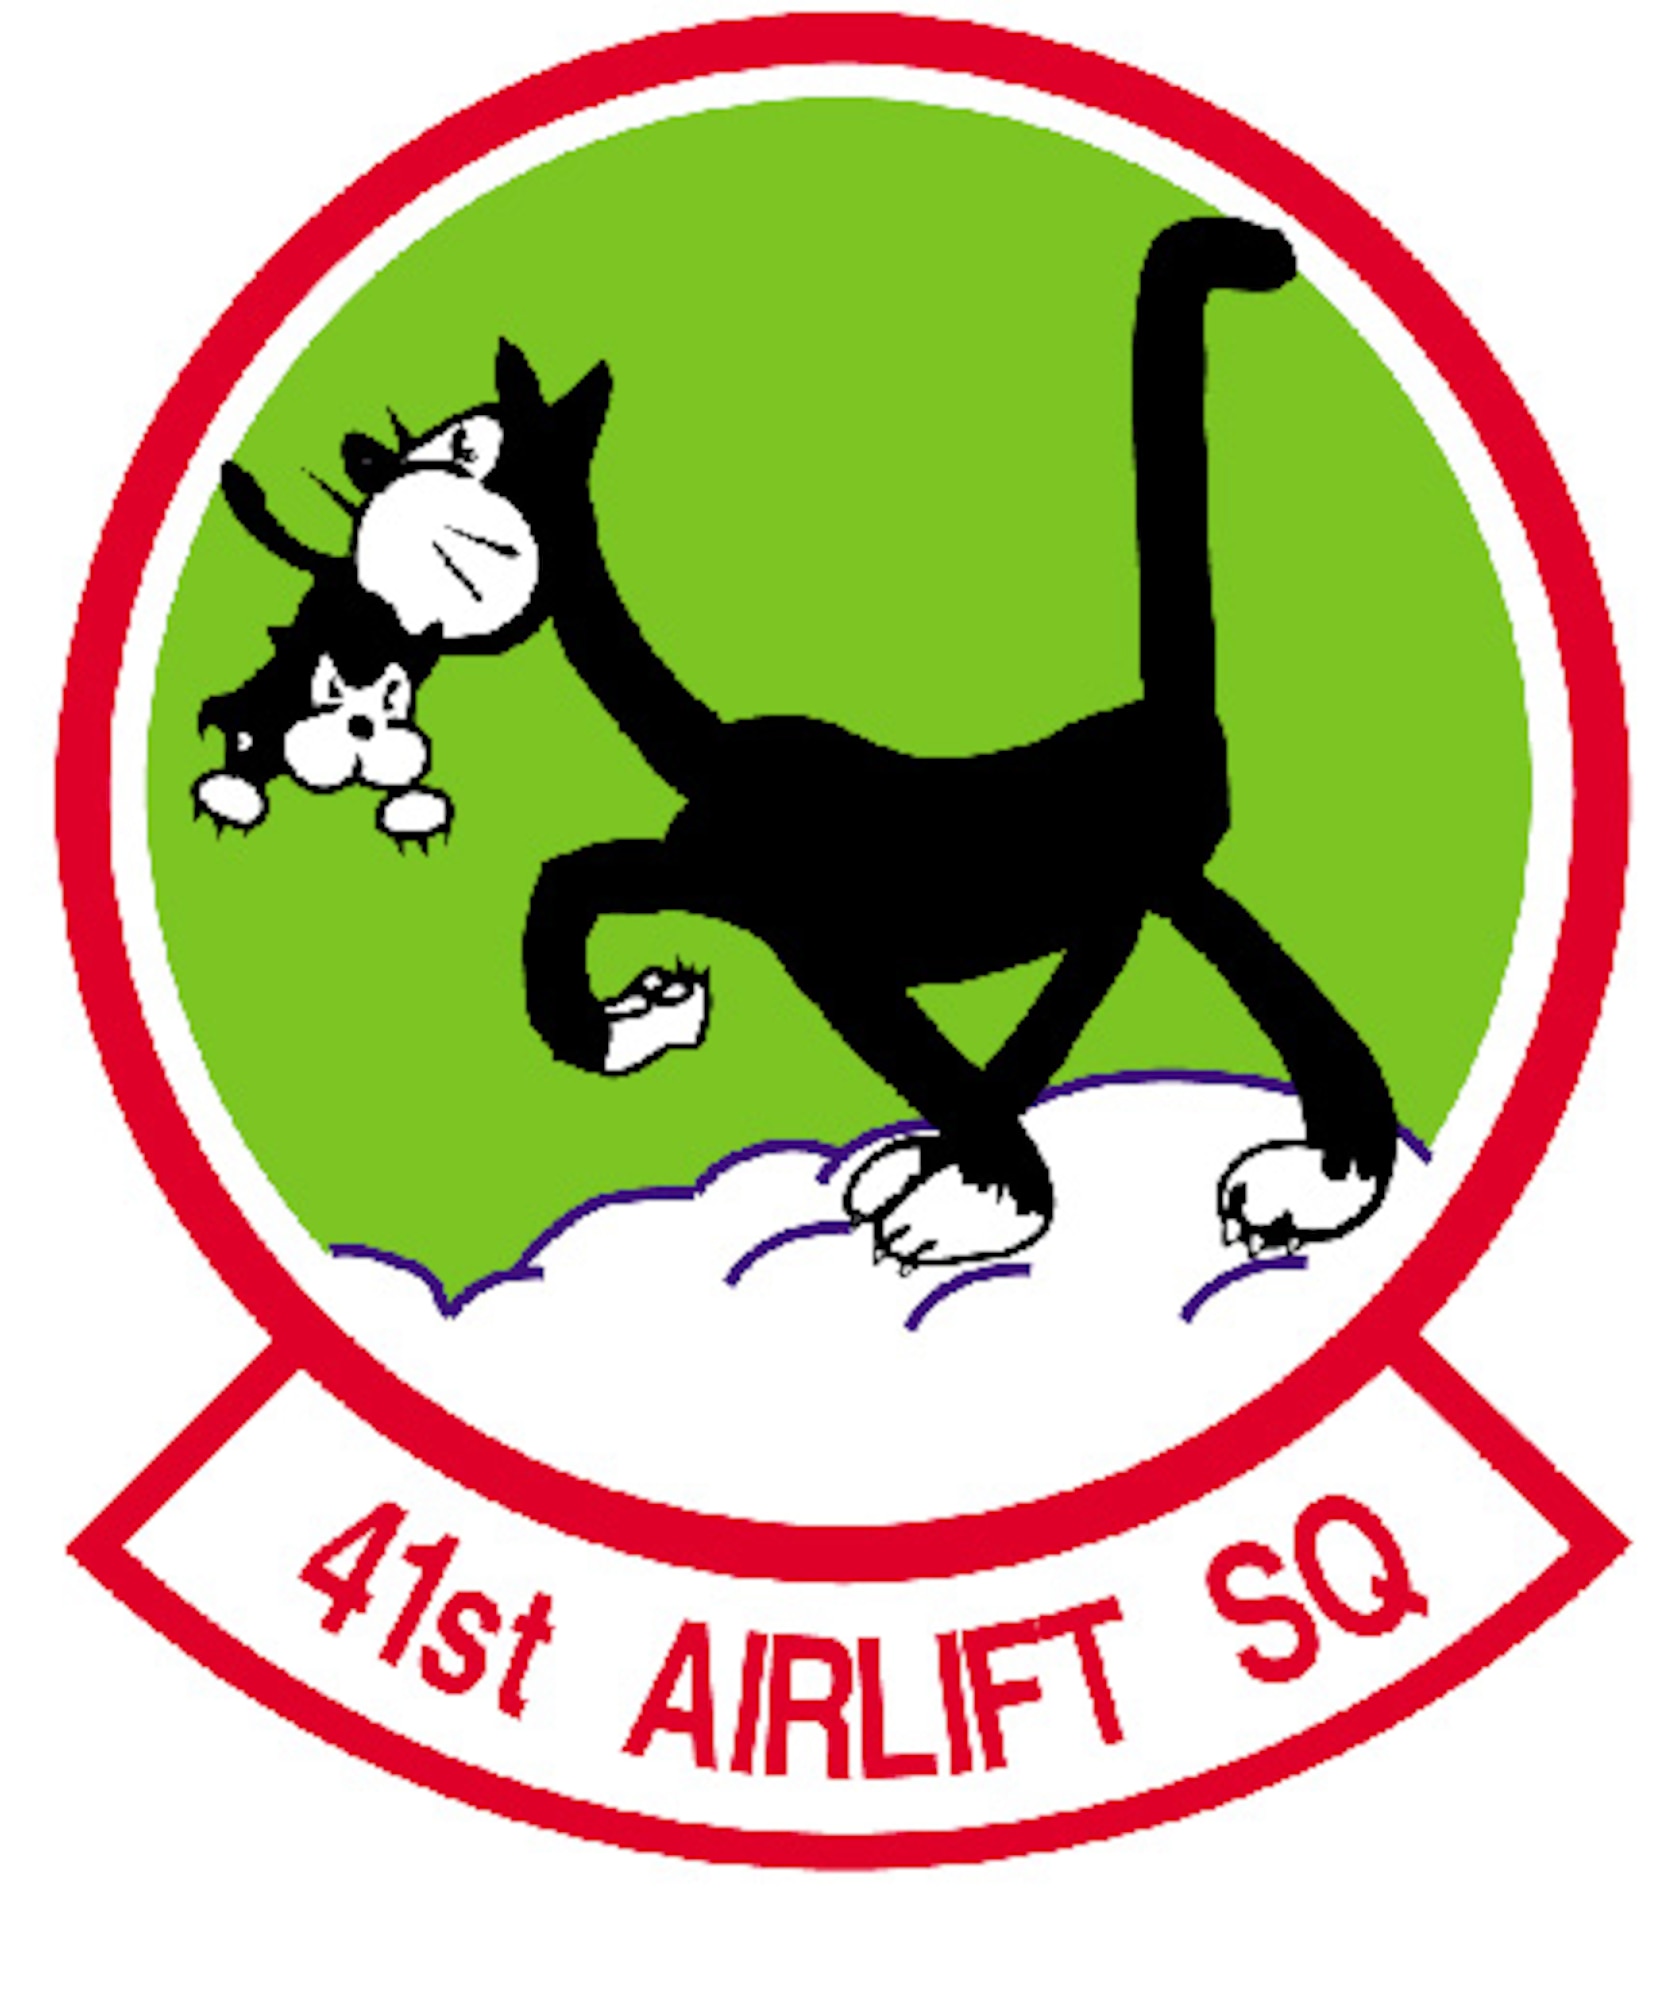 41st Airlift Squadron patch